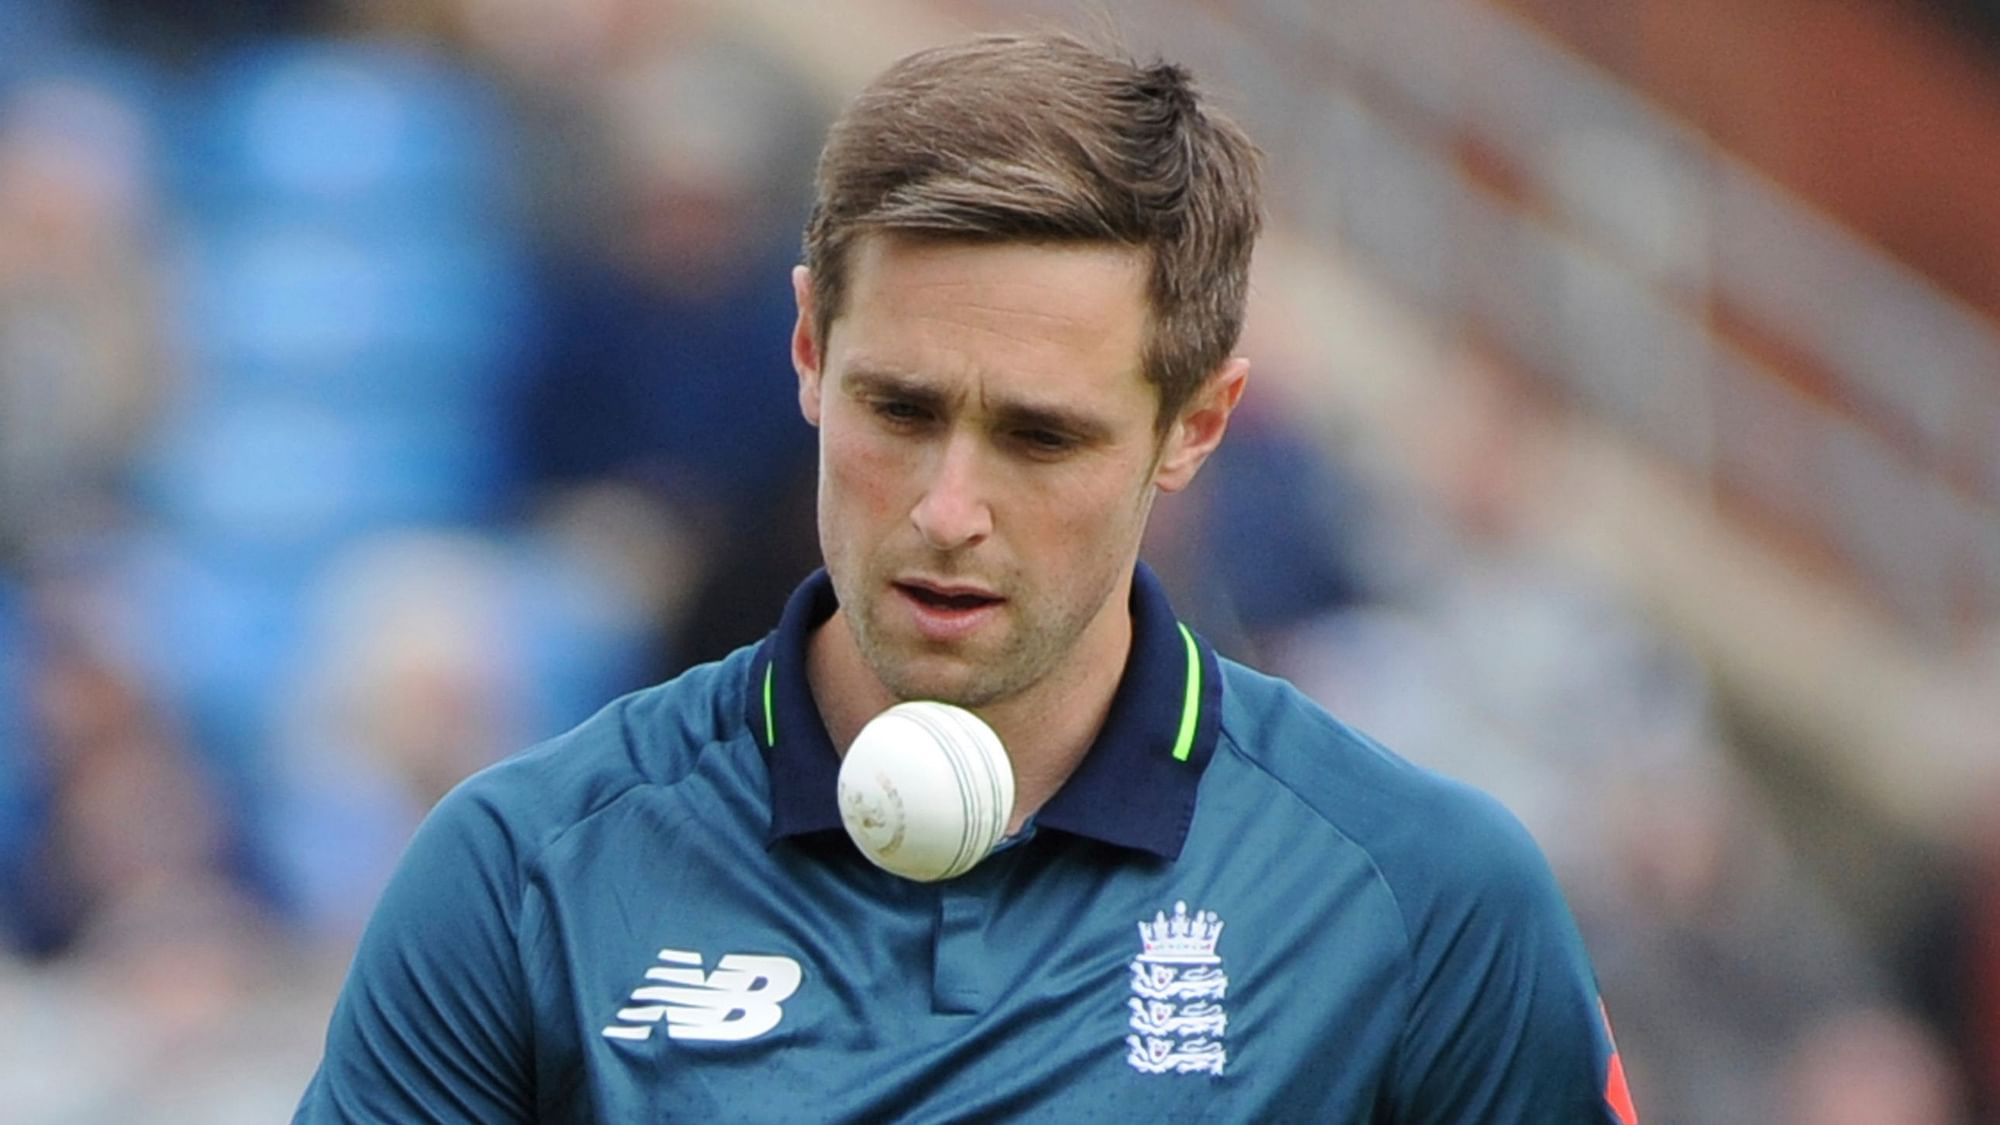 Chris Woakes ended with 5/54 in 10 overs in the fifth ODI against Pakistan.